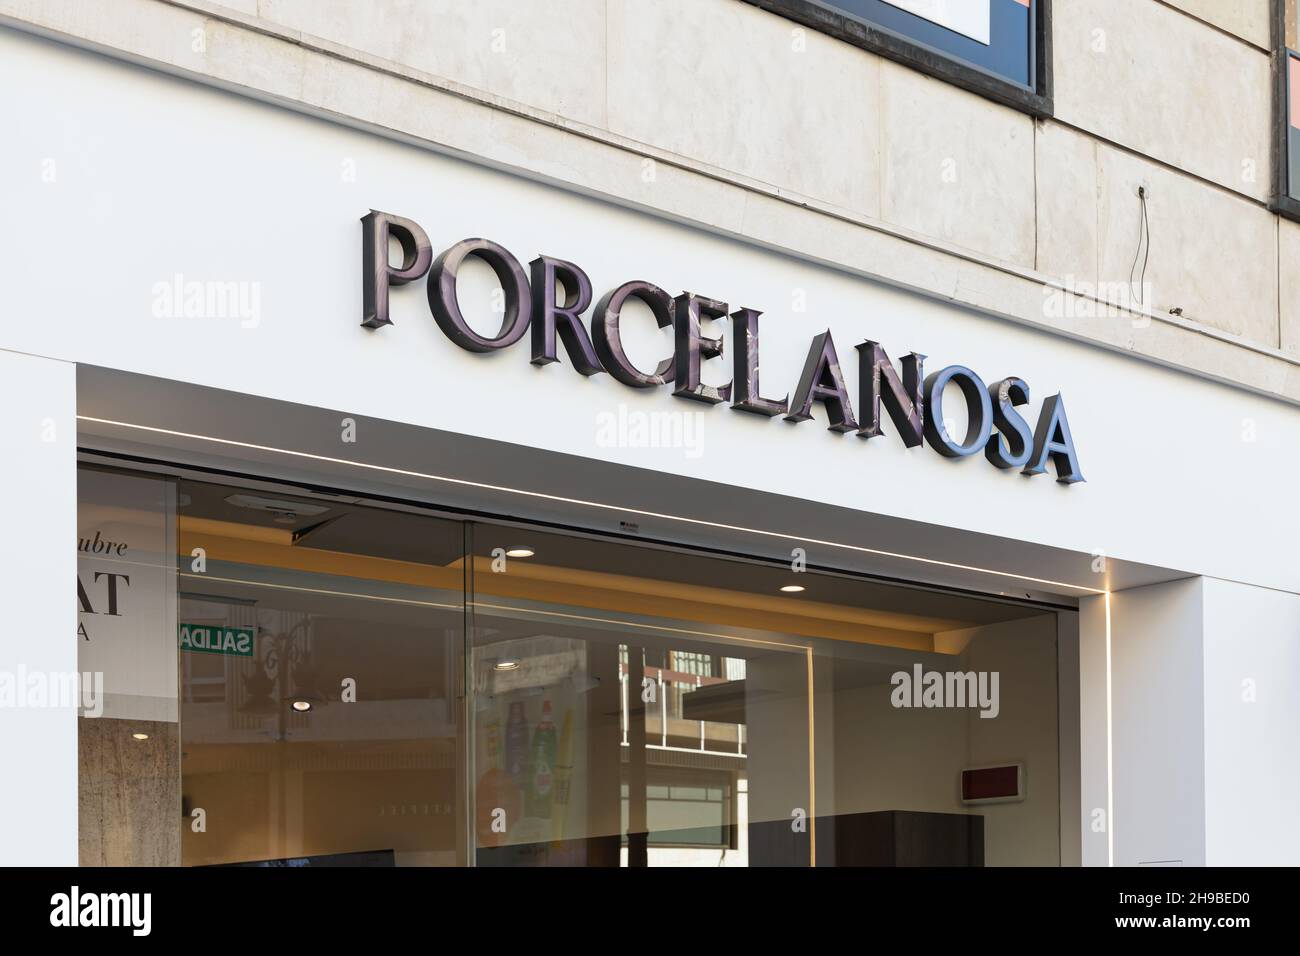 VALENCIA, SPAIN - DECEMBER 01, 2021: Porcelanosa is a Spanish manufacturer, distributor and retailer of ceramic tiles Stock Photo